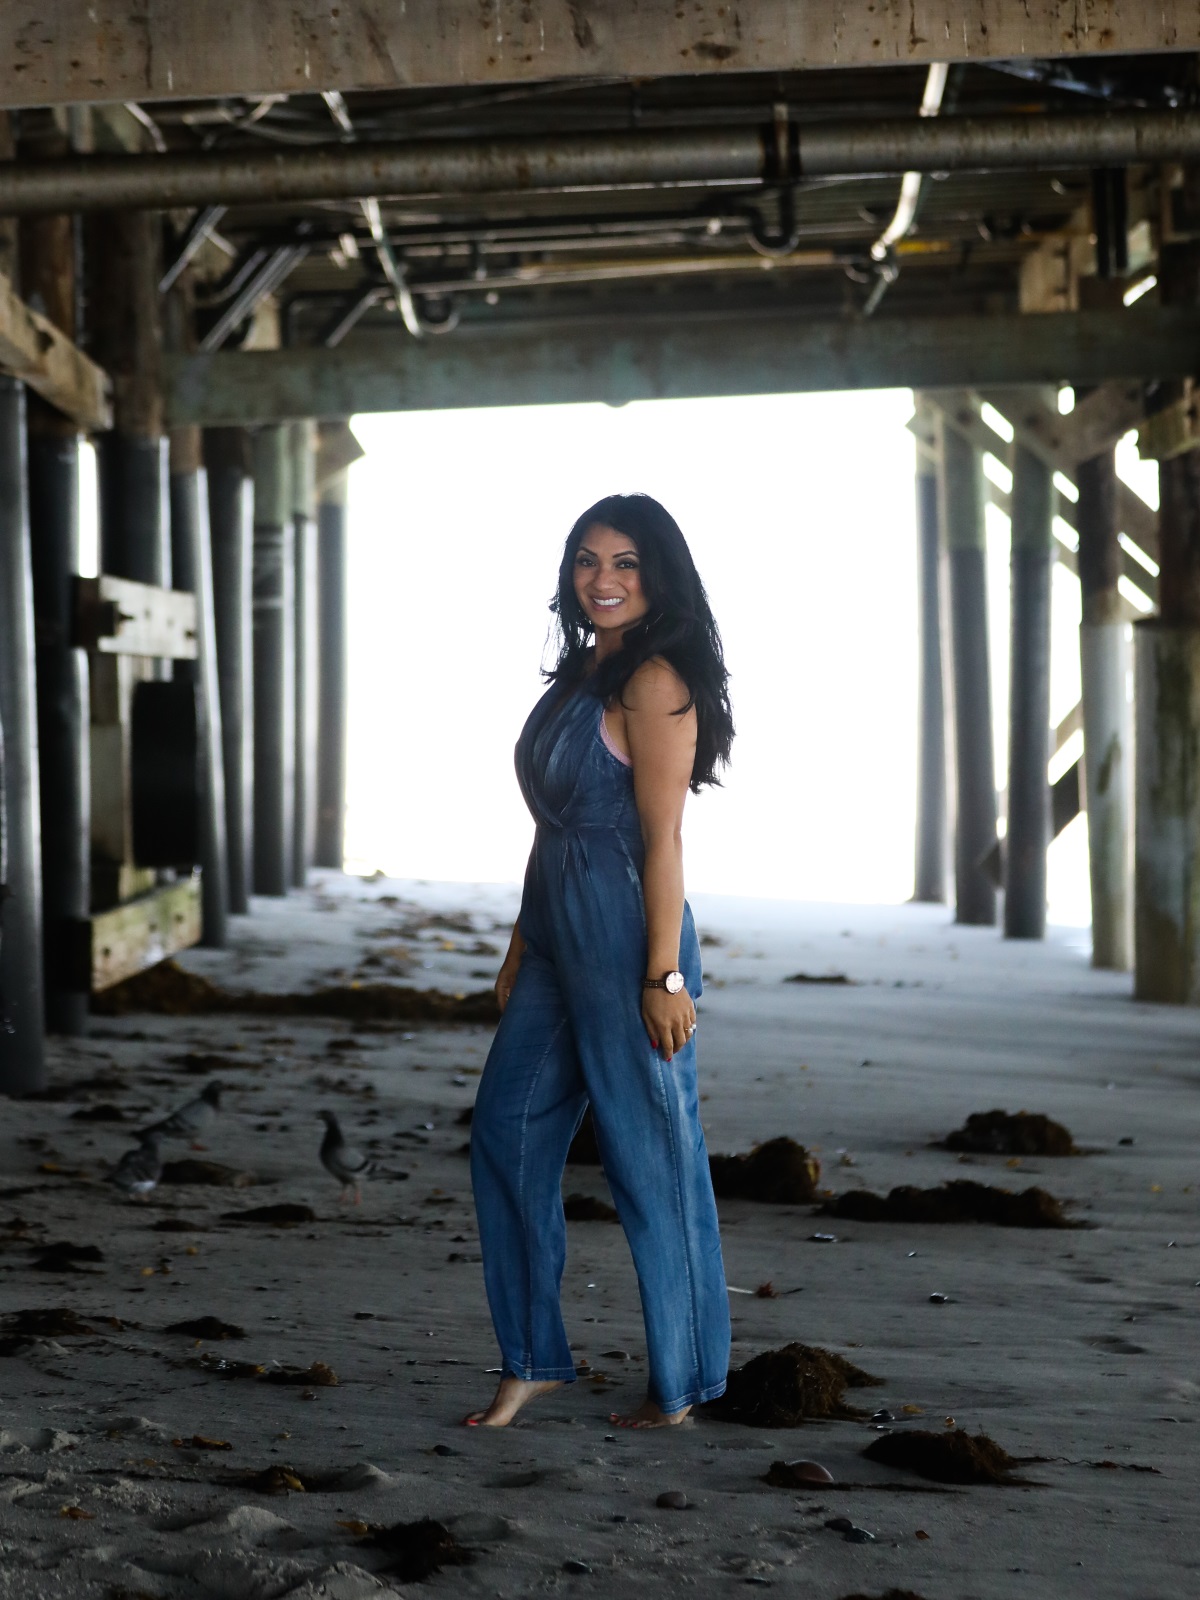 Denim Jumpsuit | Orange County Fashion Blogger Debbie Savage at To Thine Own Style Be True